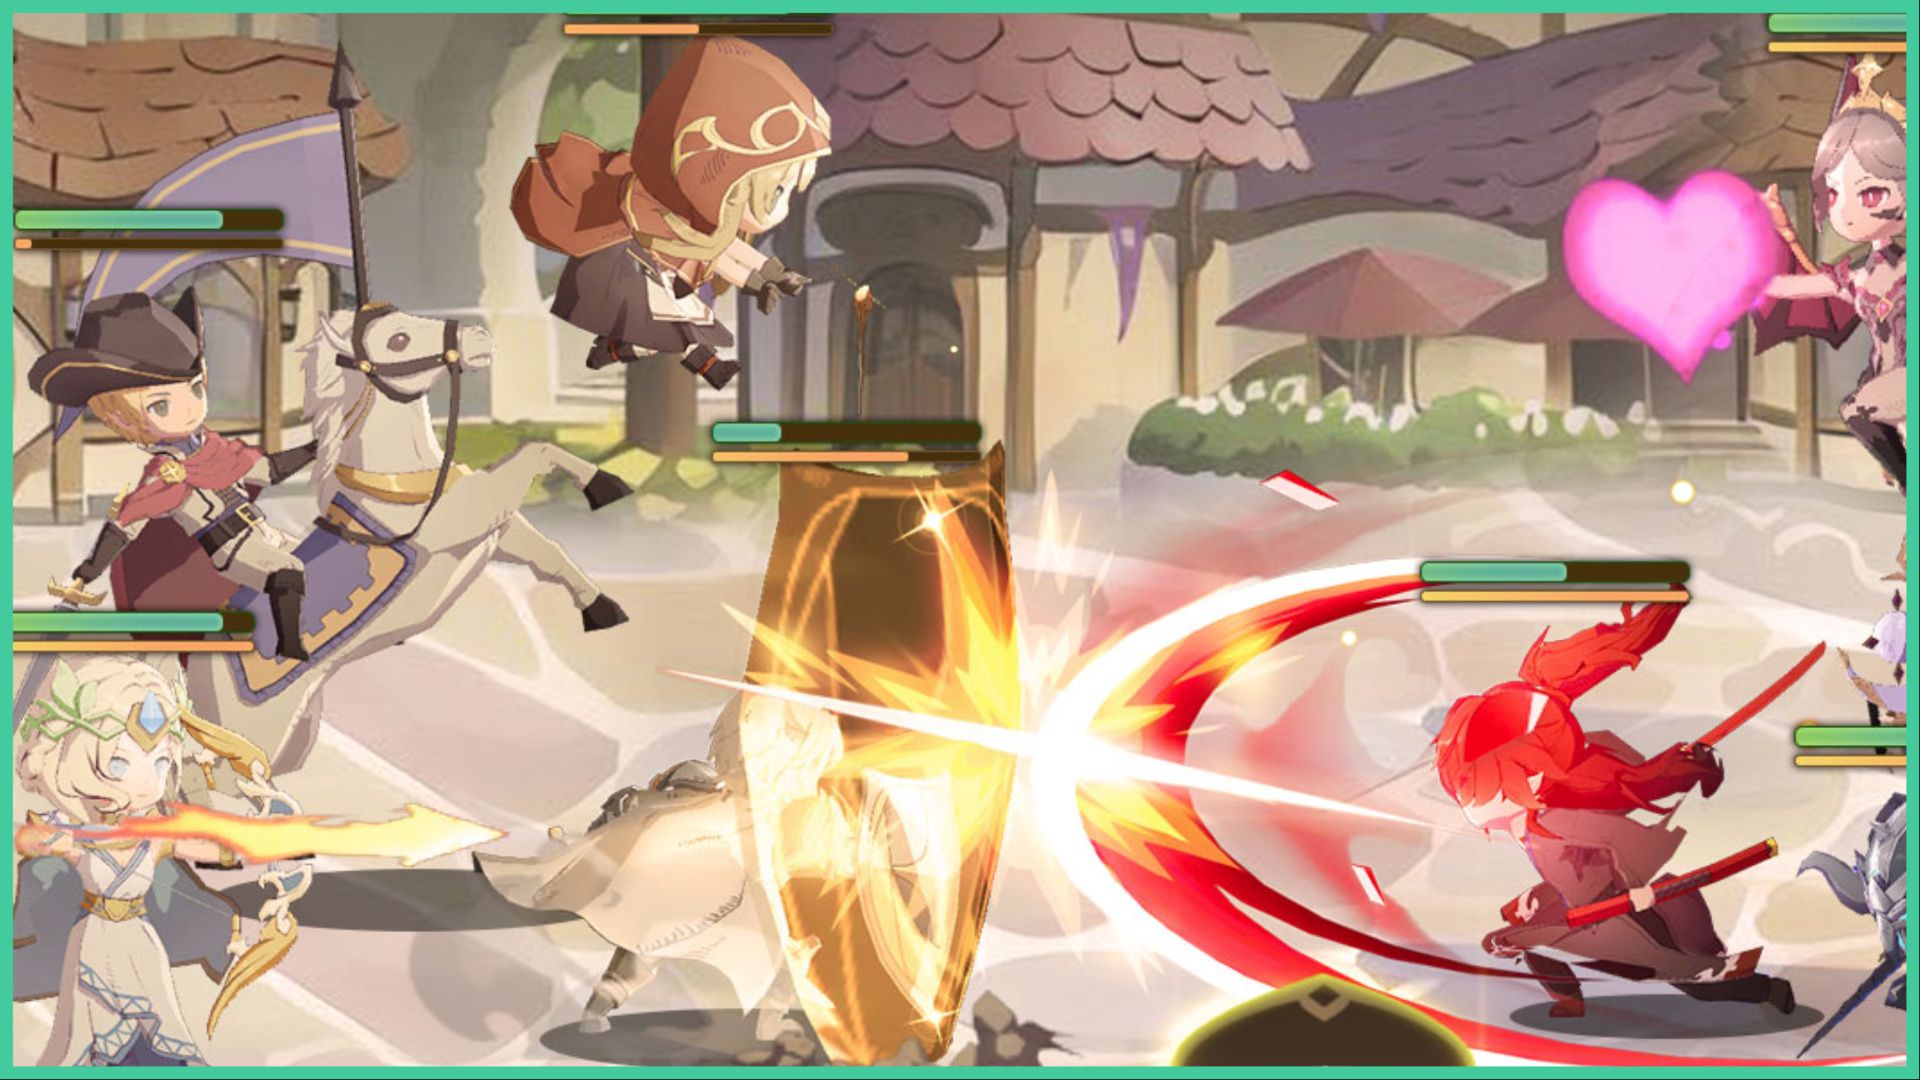 feature image for our magic chronicle reroll guide, the image features a screenshot from battle with chibi style characters attack each other with a range of abilities such as bow and arrow, mages, blades, and a giant shield that is being held by a character in the middle, there is also a character on a horse holding a spear